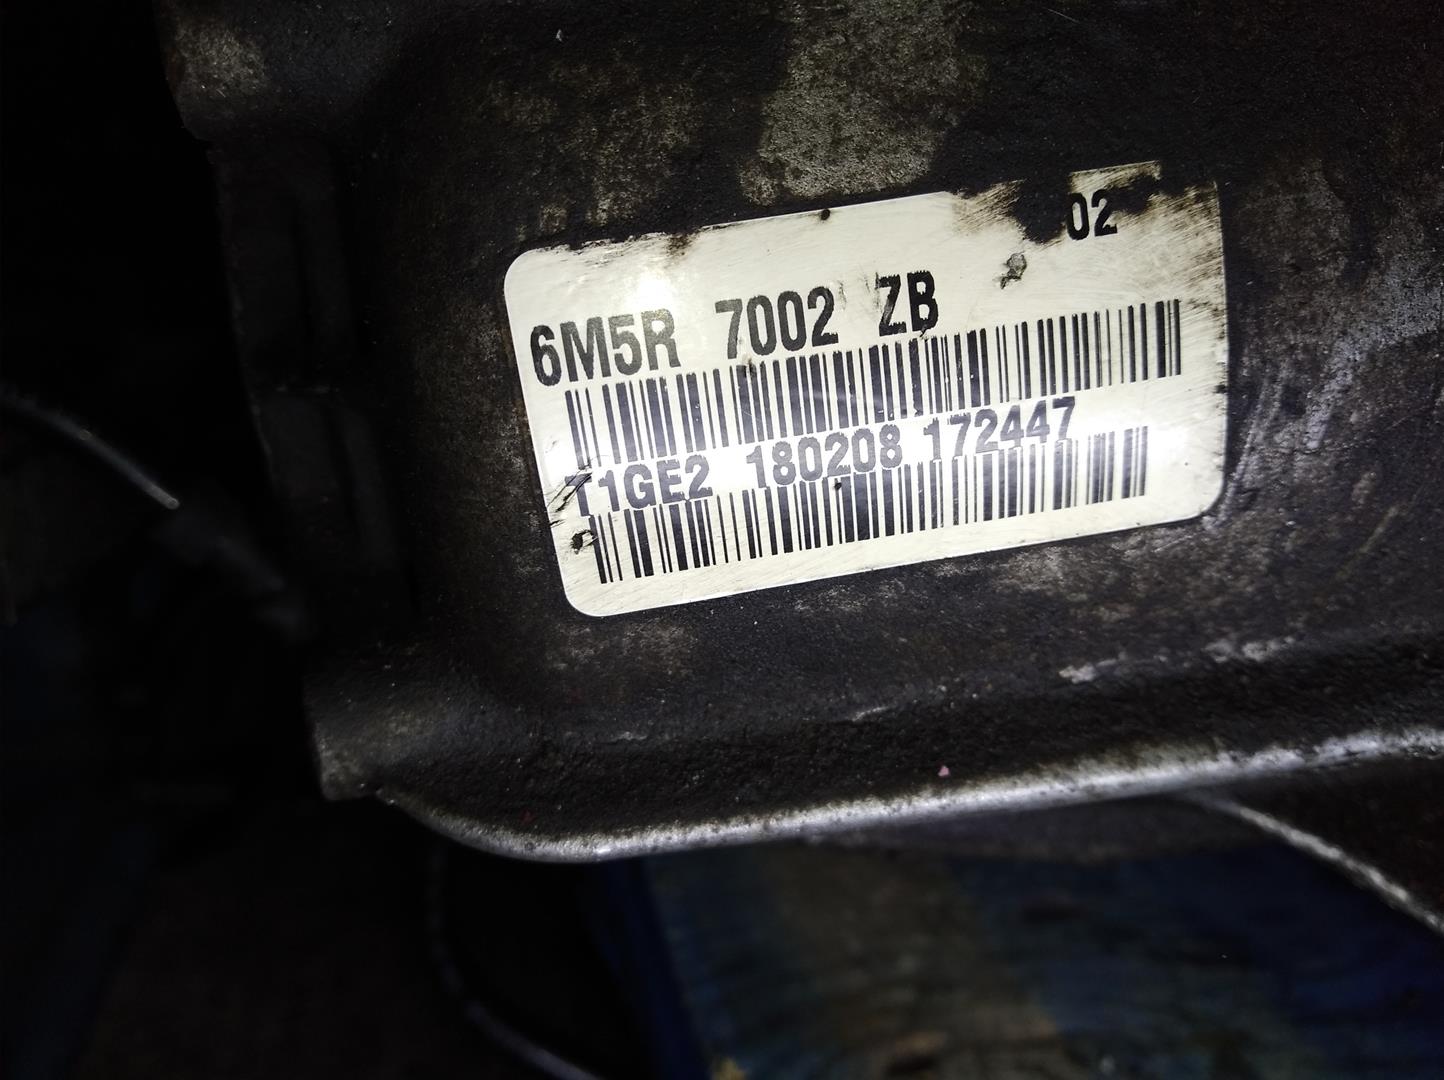 FORD Focus 2 generation (2004-2011) Gearbox 6M5R7002ZB 18503539